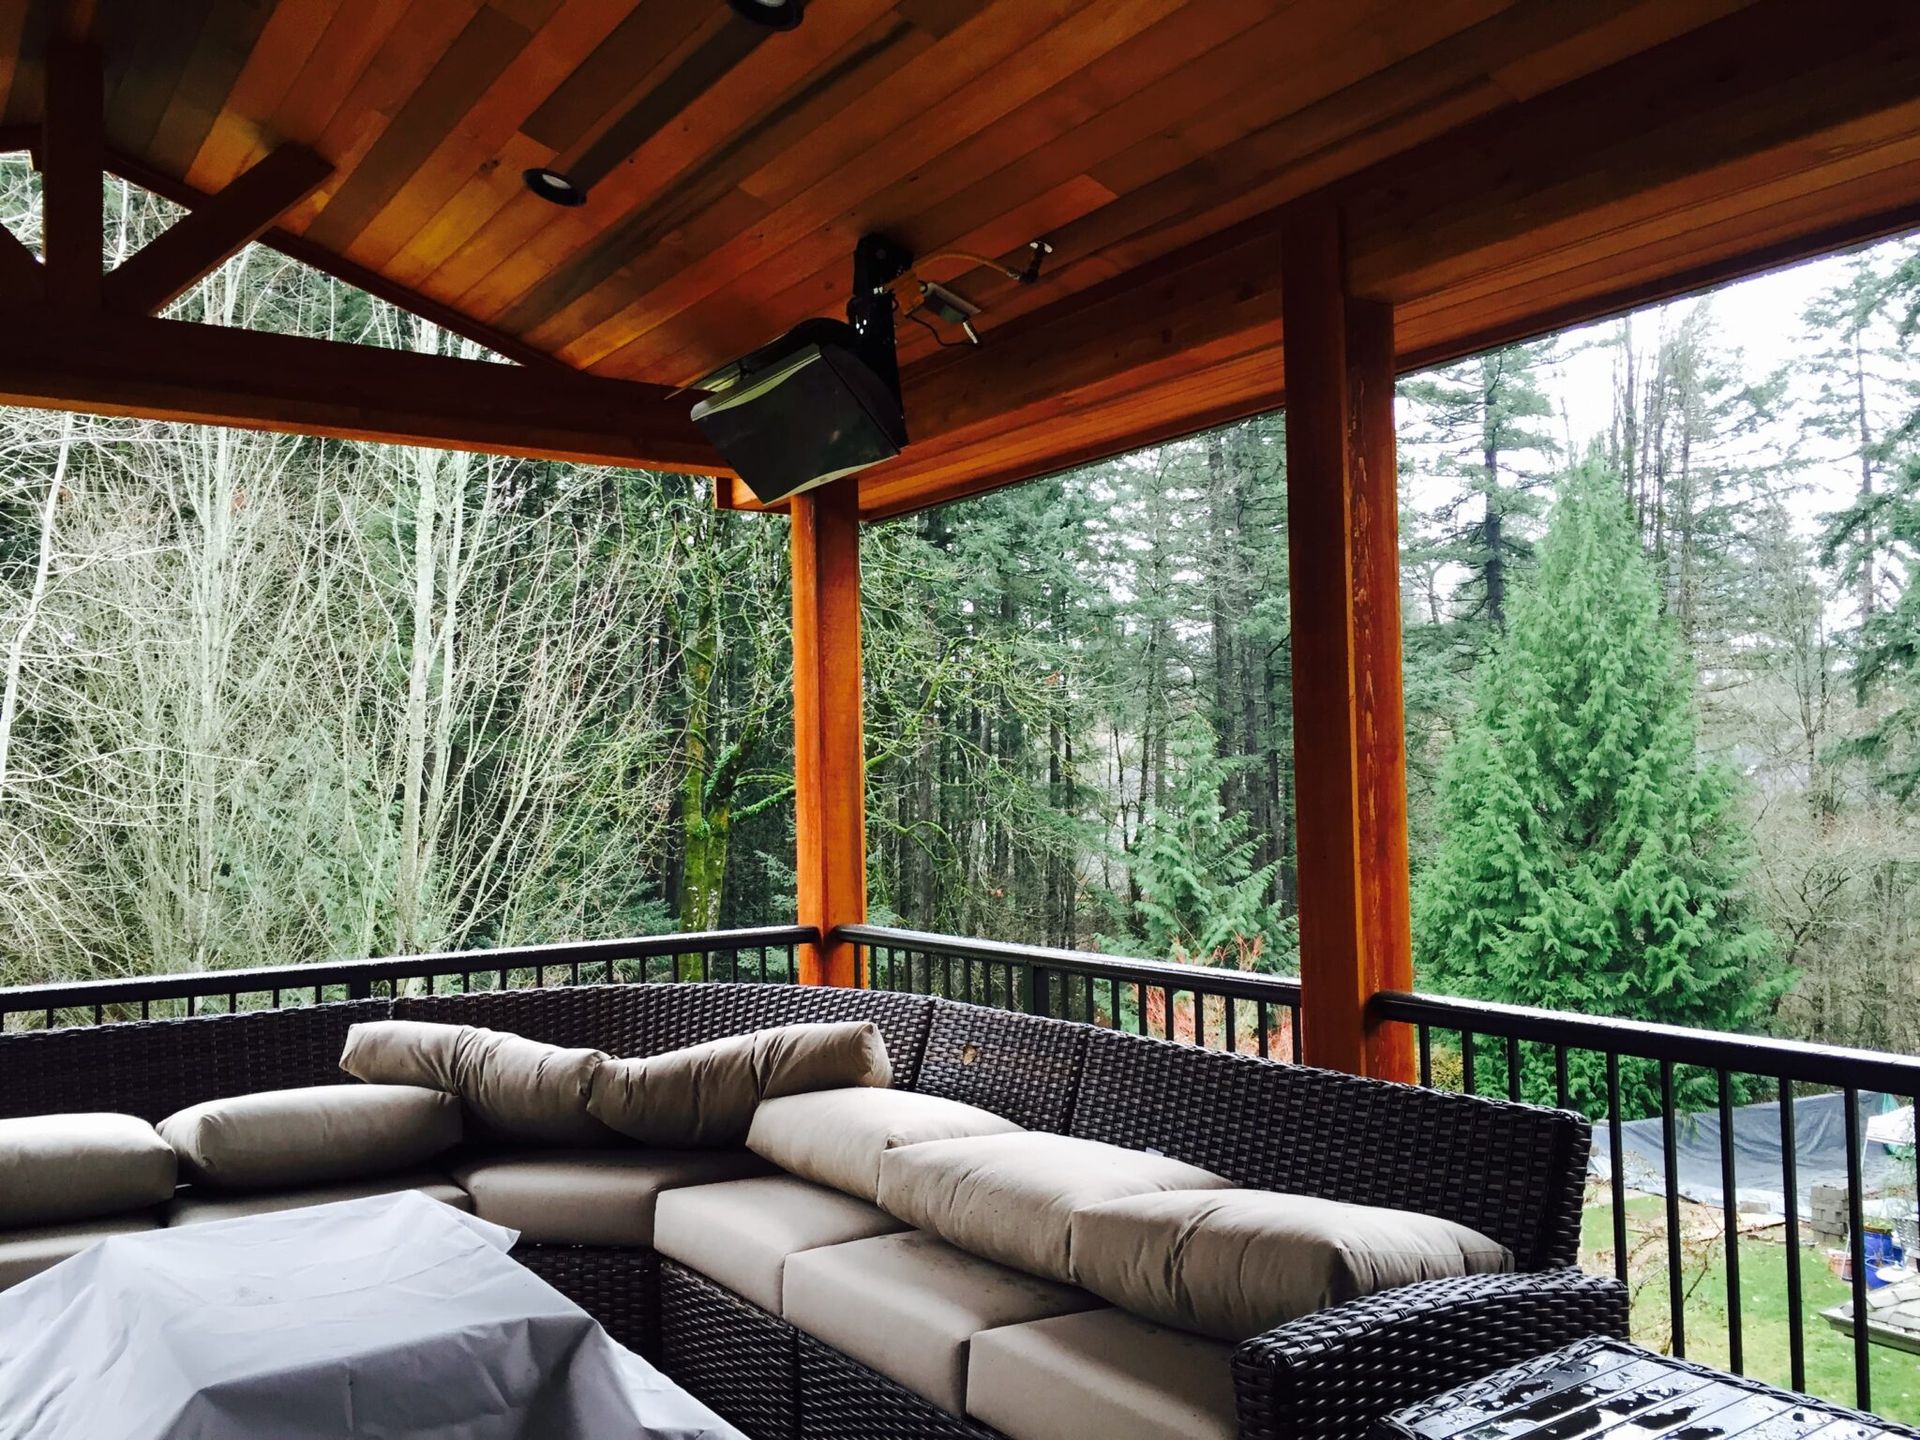 Portland Deck Contractor Builds outdoor Living Space with Underdeck System